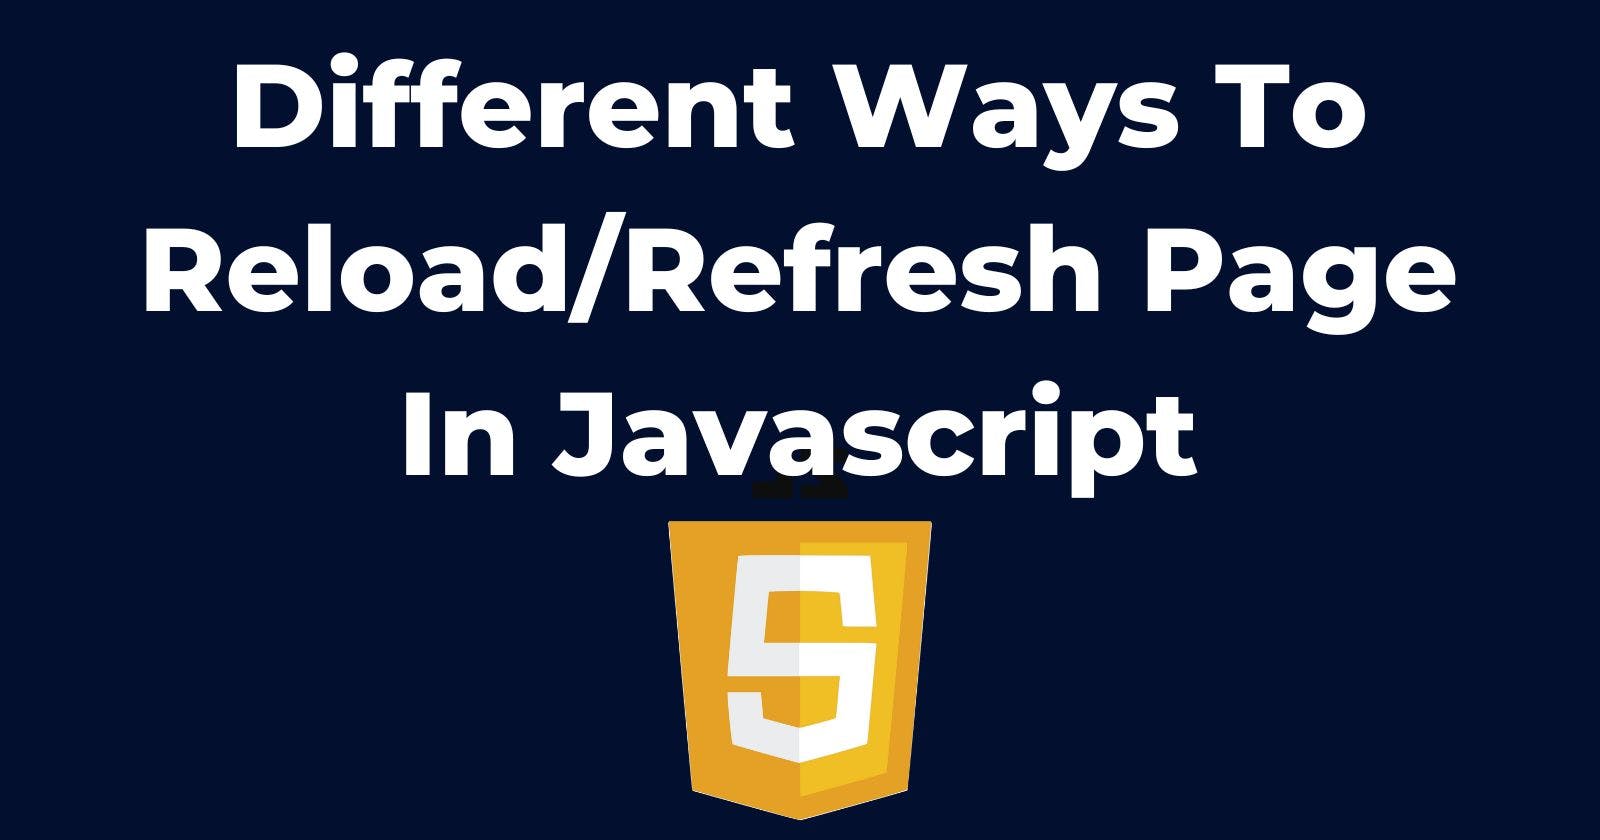 Different Ways To Reload/Refresh Page In Javascript